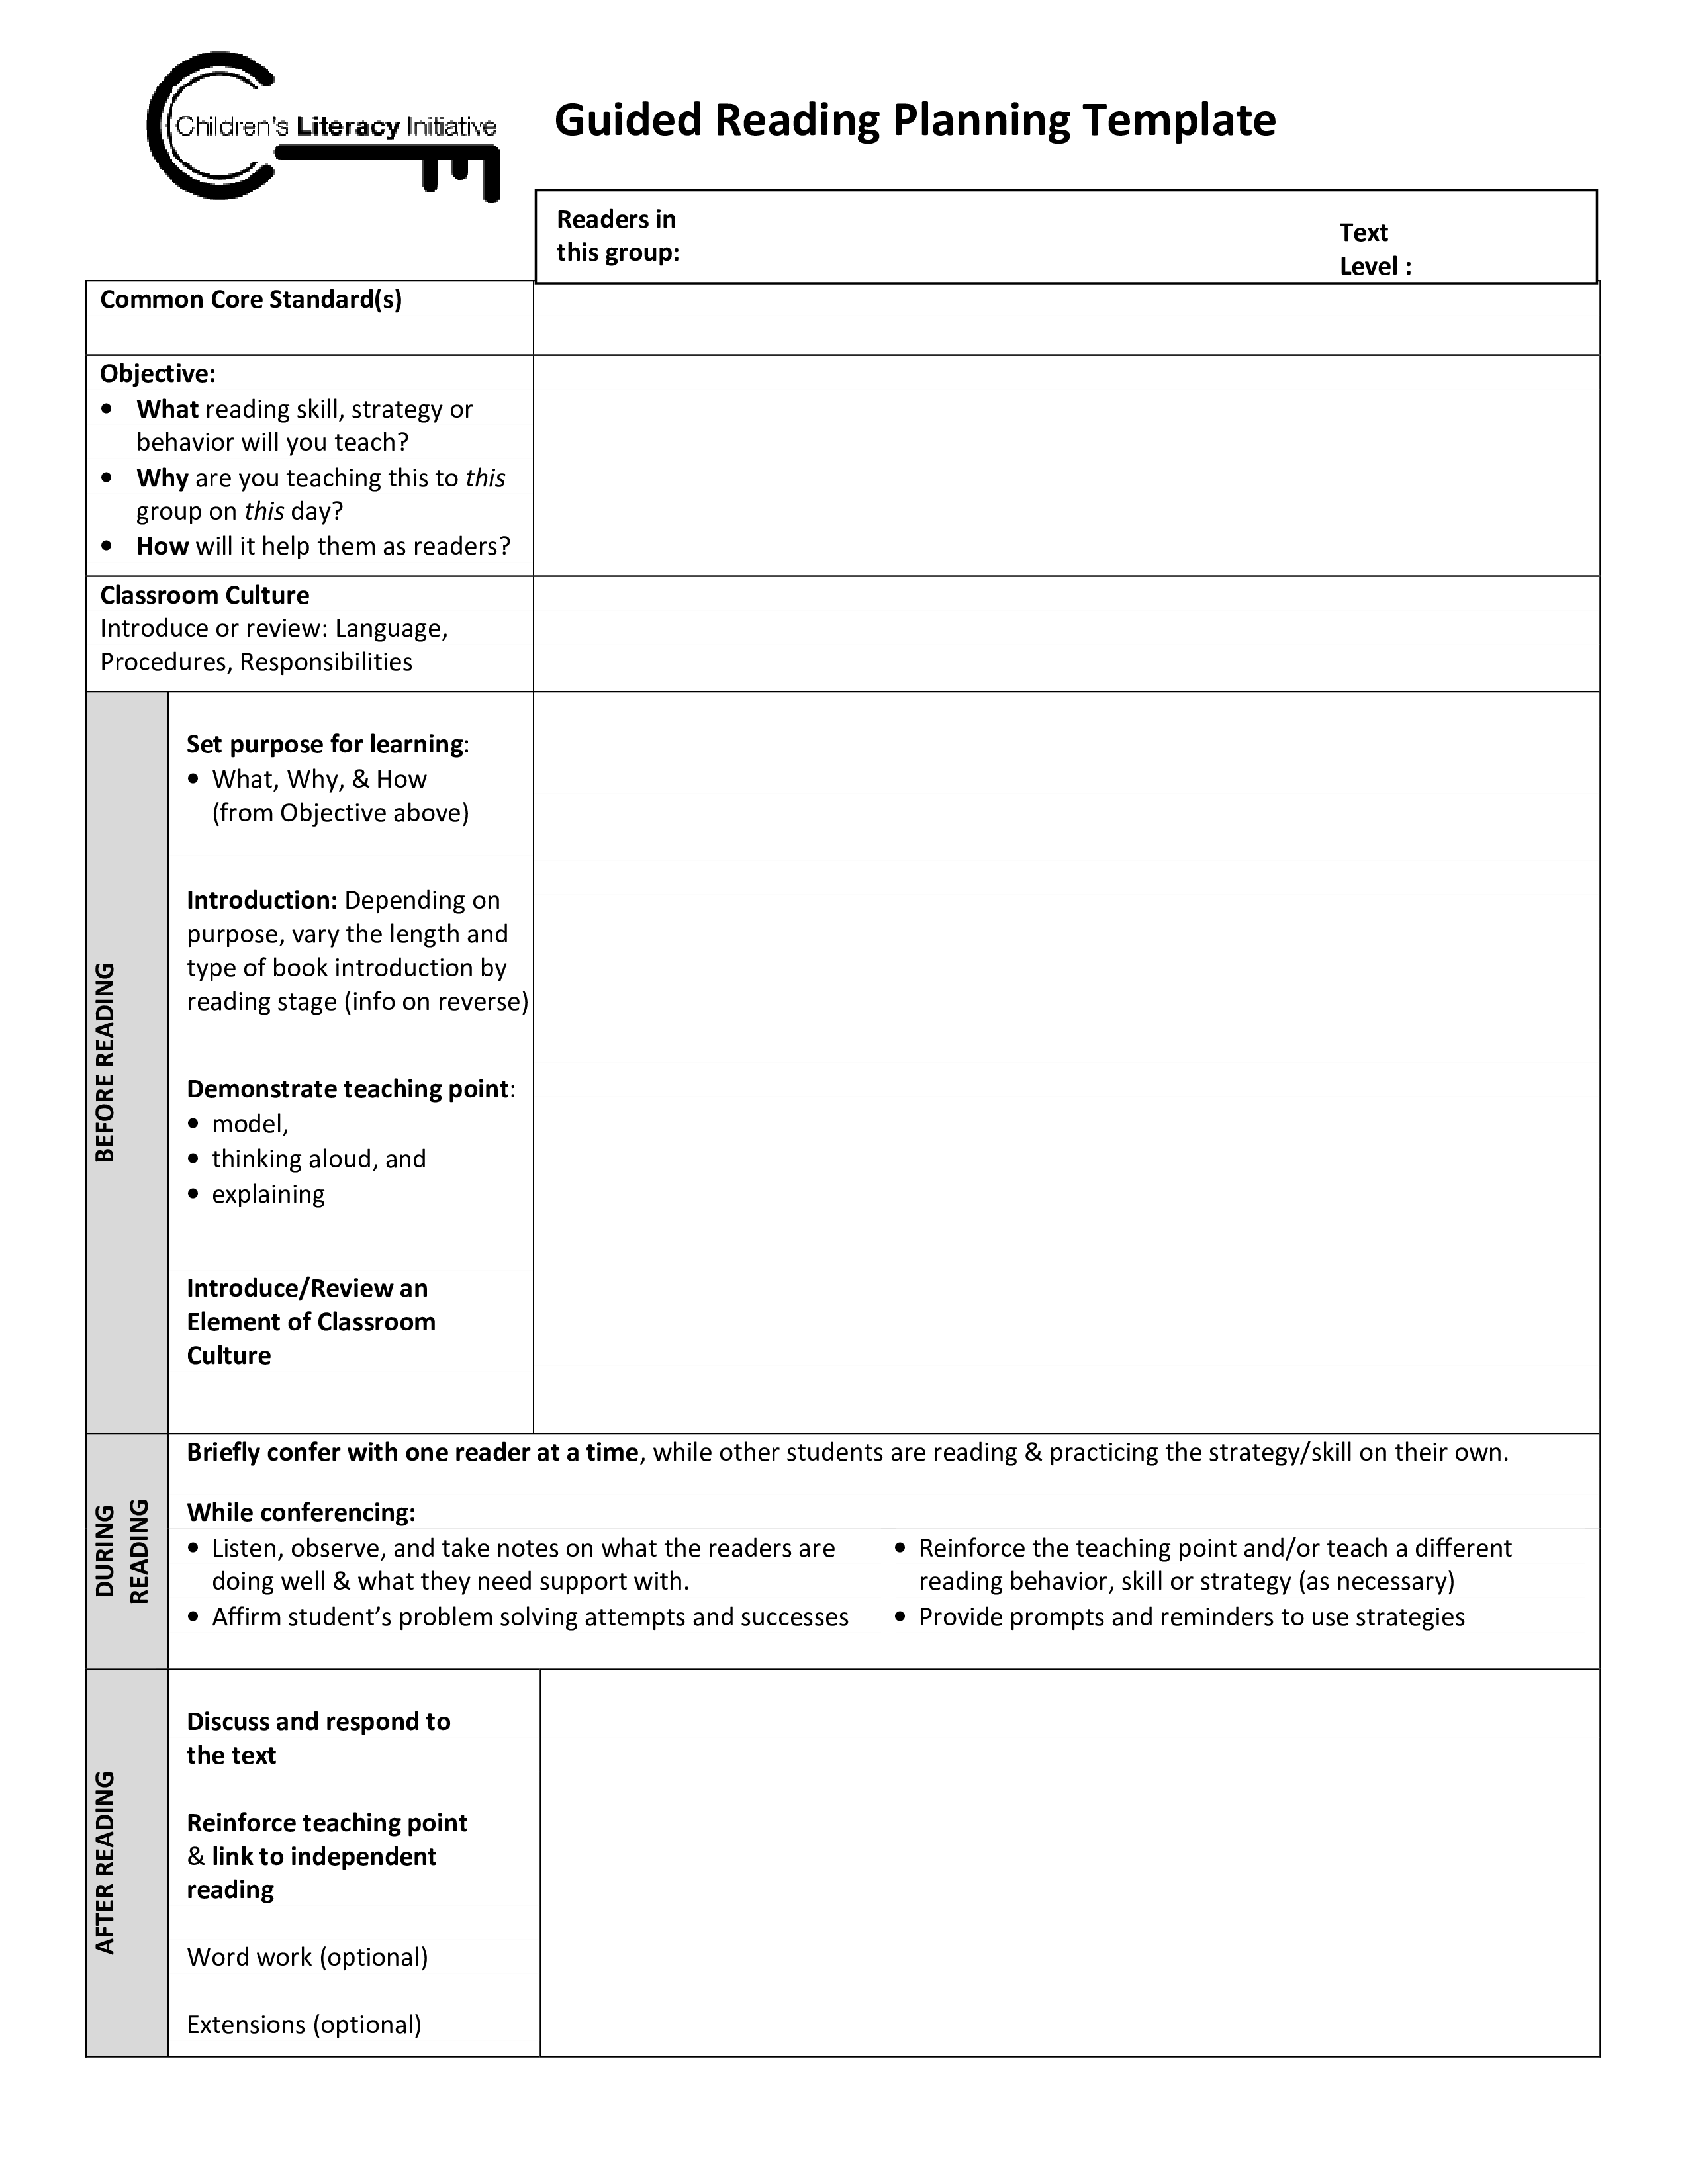 Reading Group Lesson Plan | Templates at ...